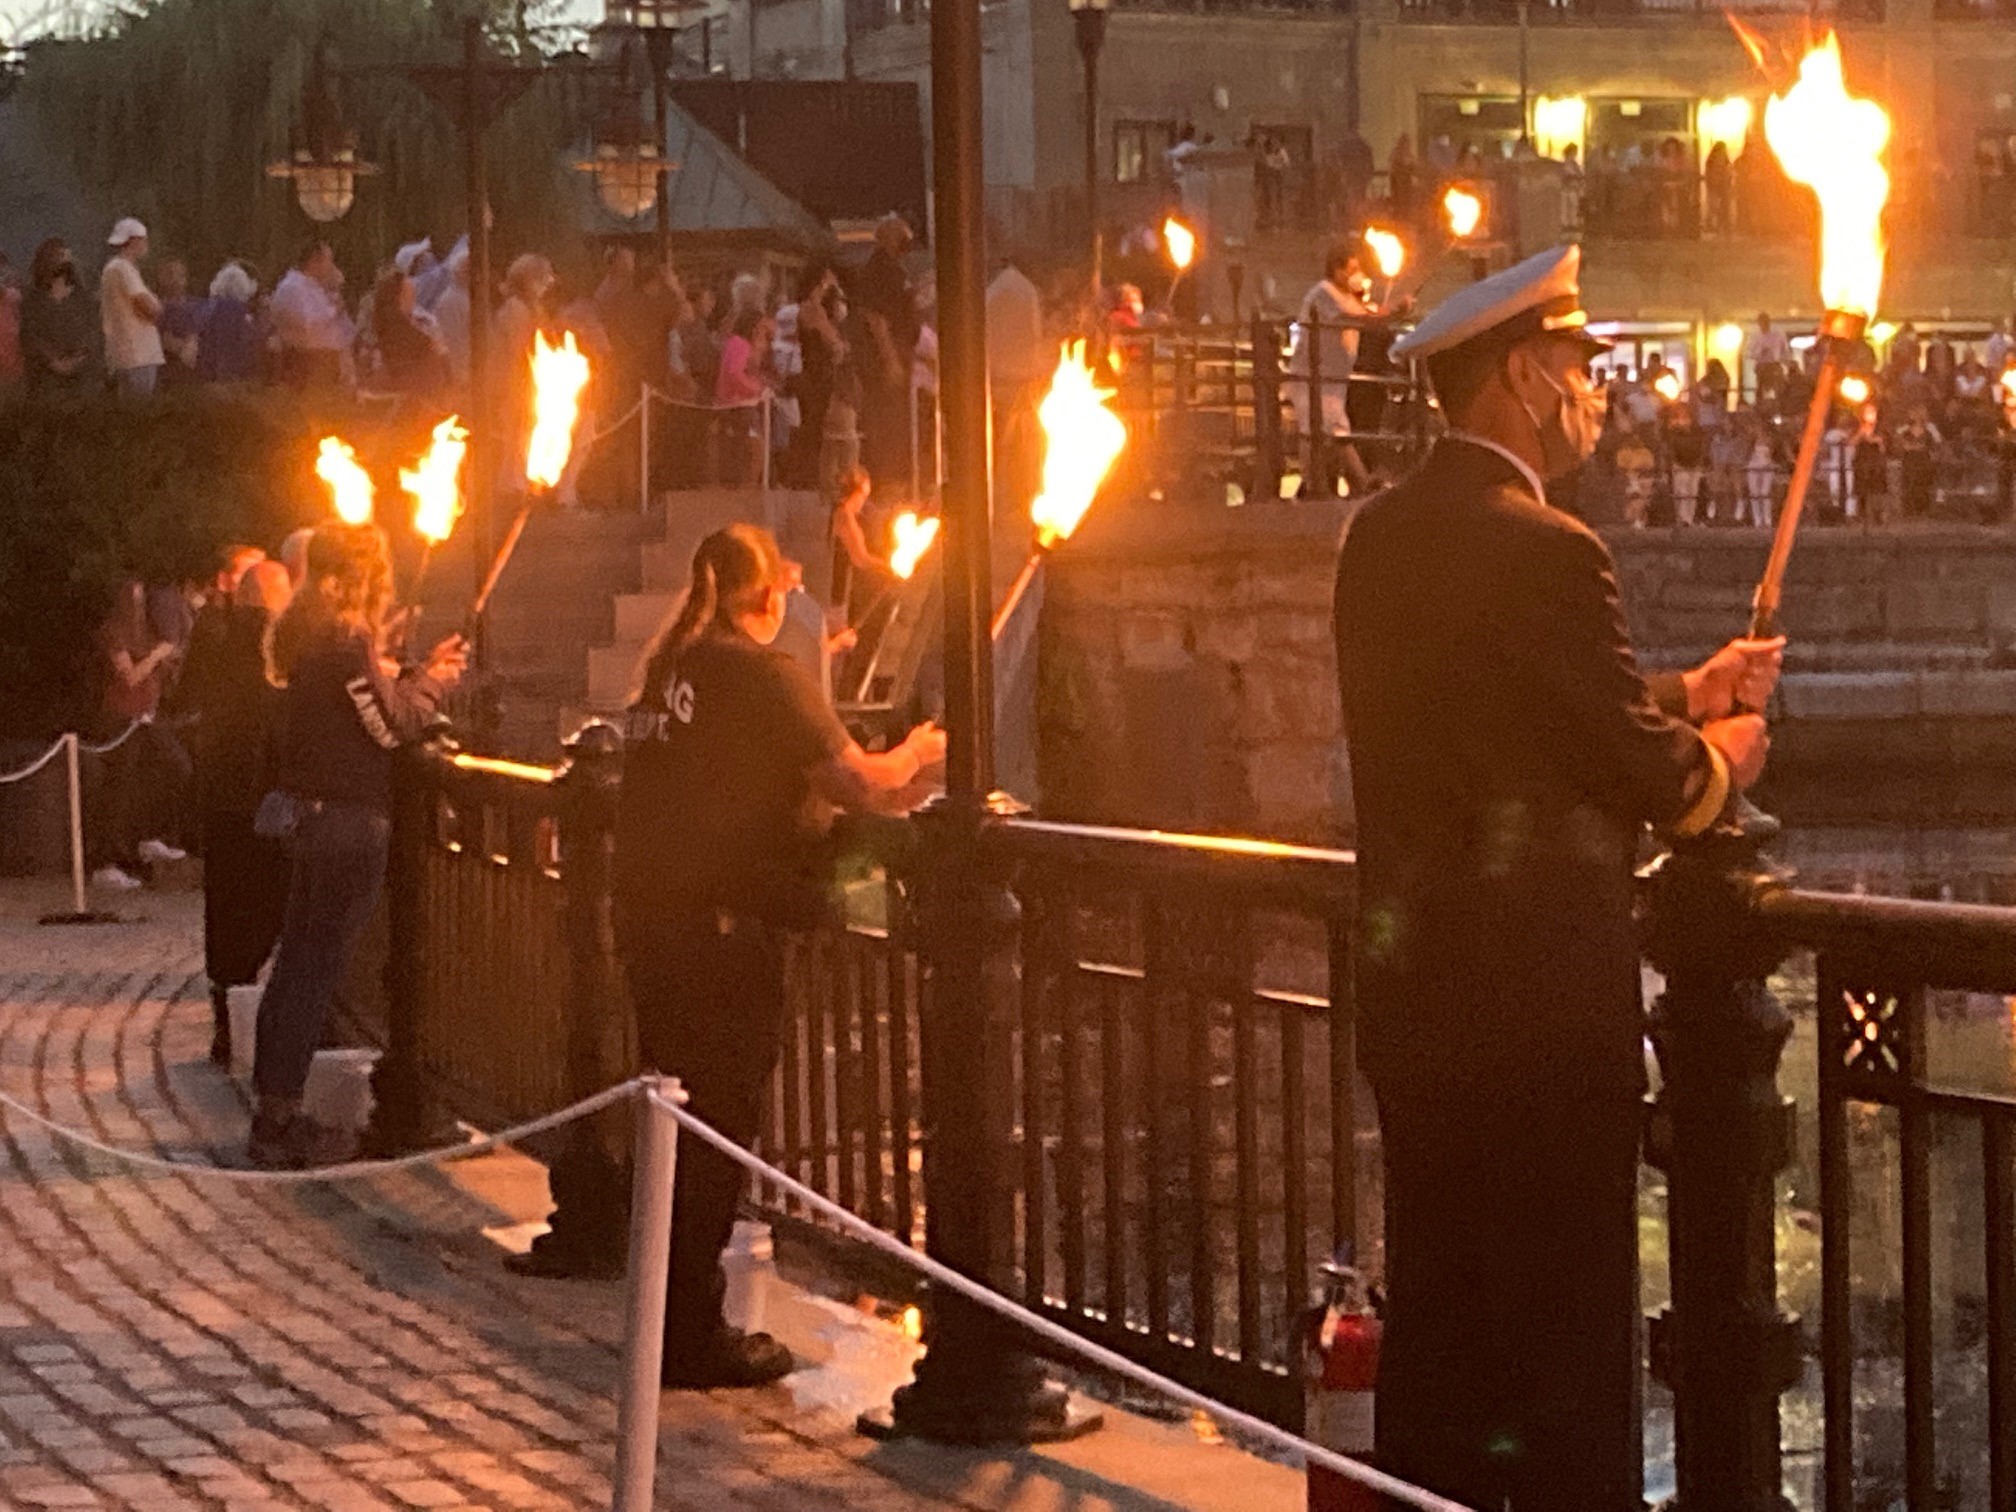 WaterFire Providence returns for first time in 18 months, begins season